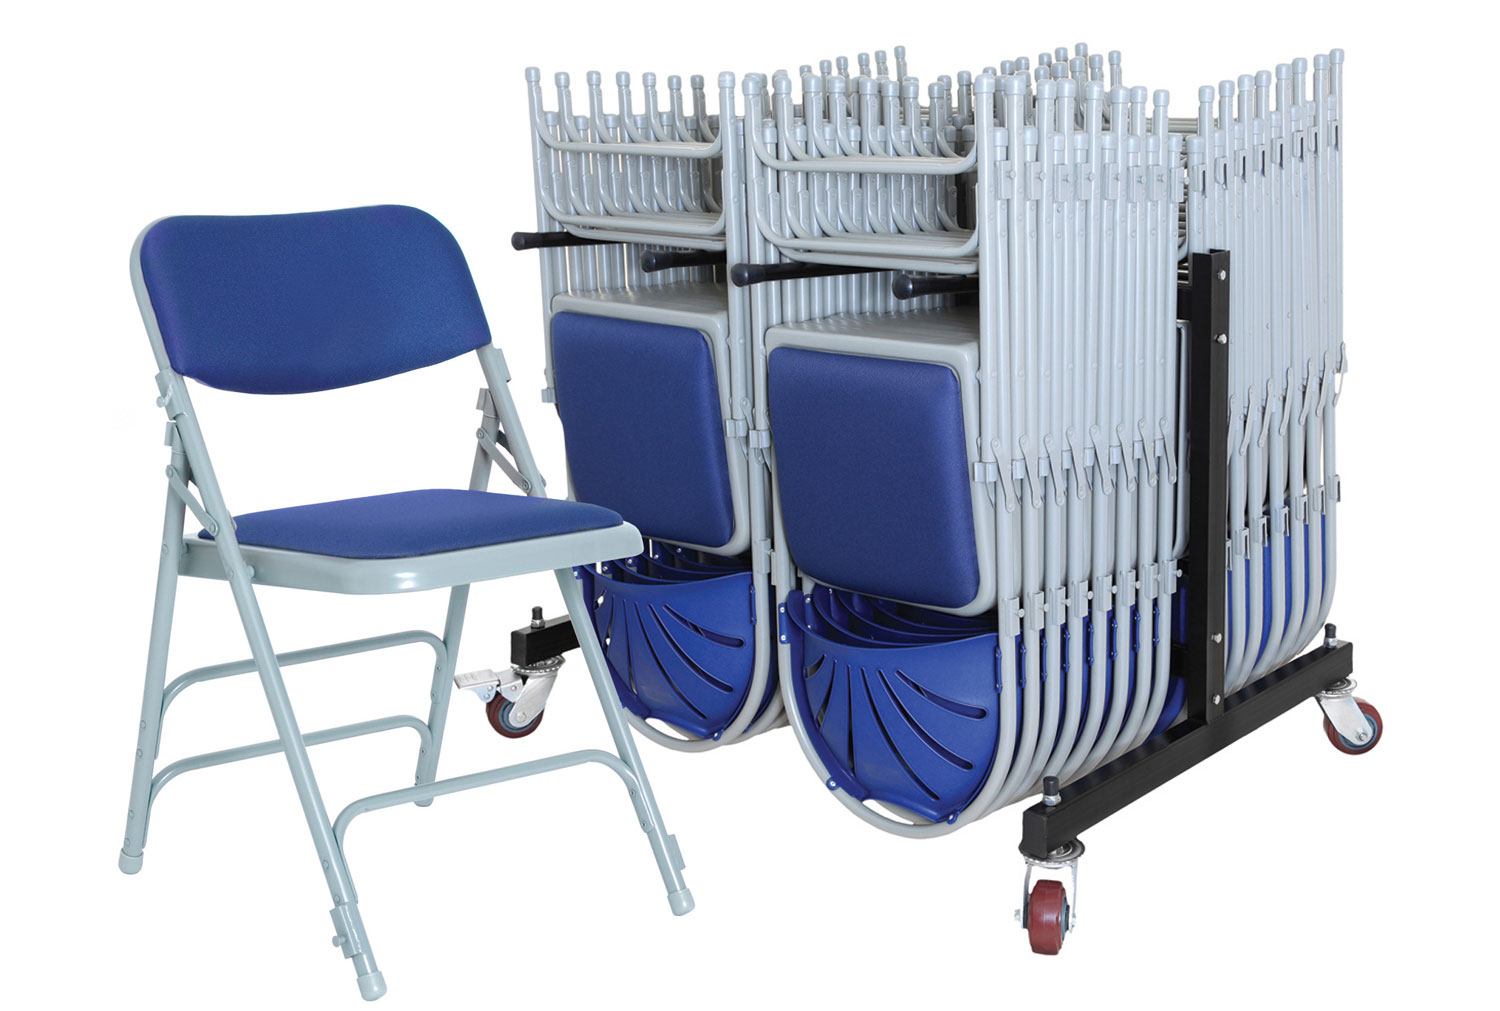 Upholstered Folding Office Chair Bundle Deal (28 Office Chairs & 1 Trolley), Blue